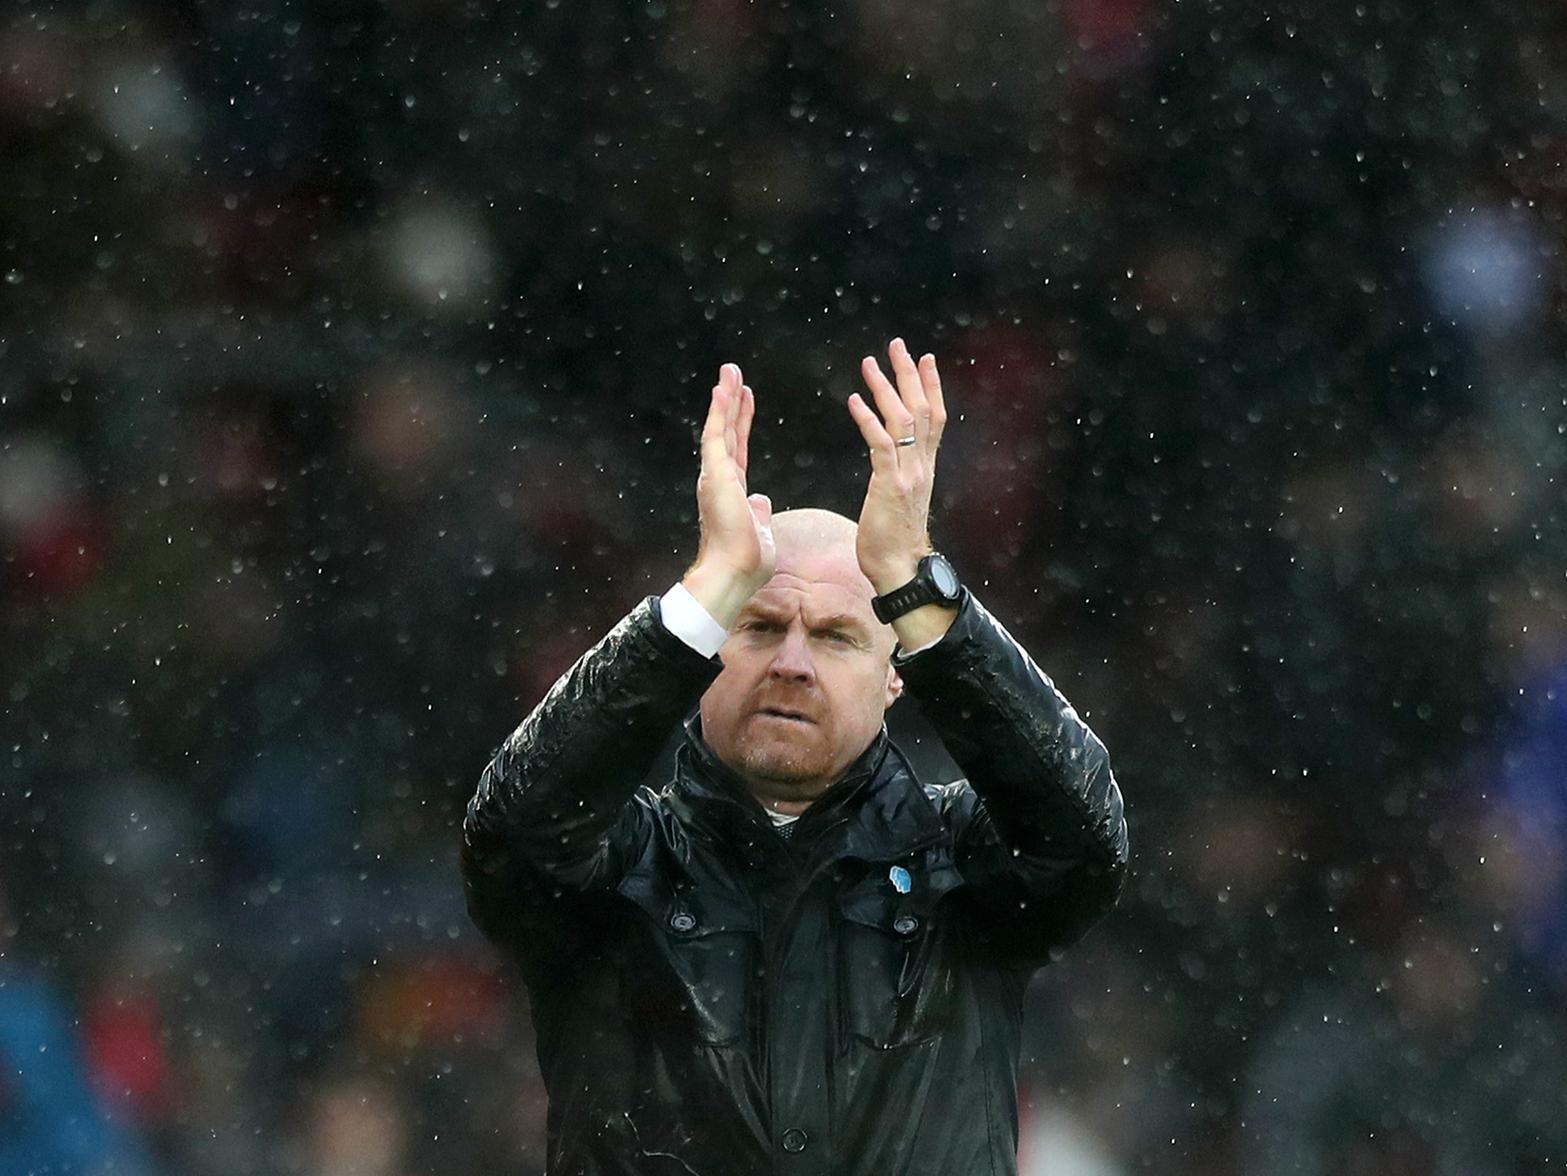 With Man City banned from European competitions for two years, there's an extra place up for grabs. Clarets boss Sean Dyche has said they won't secure it without consistency, ahead of their clash against the Cherries.